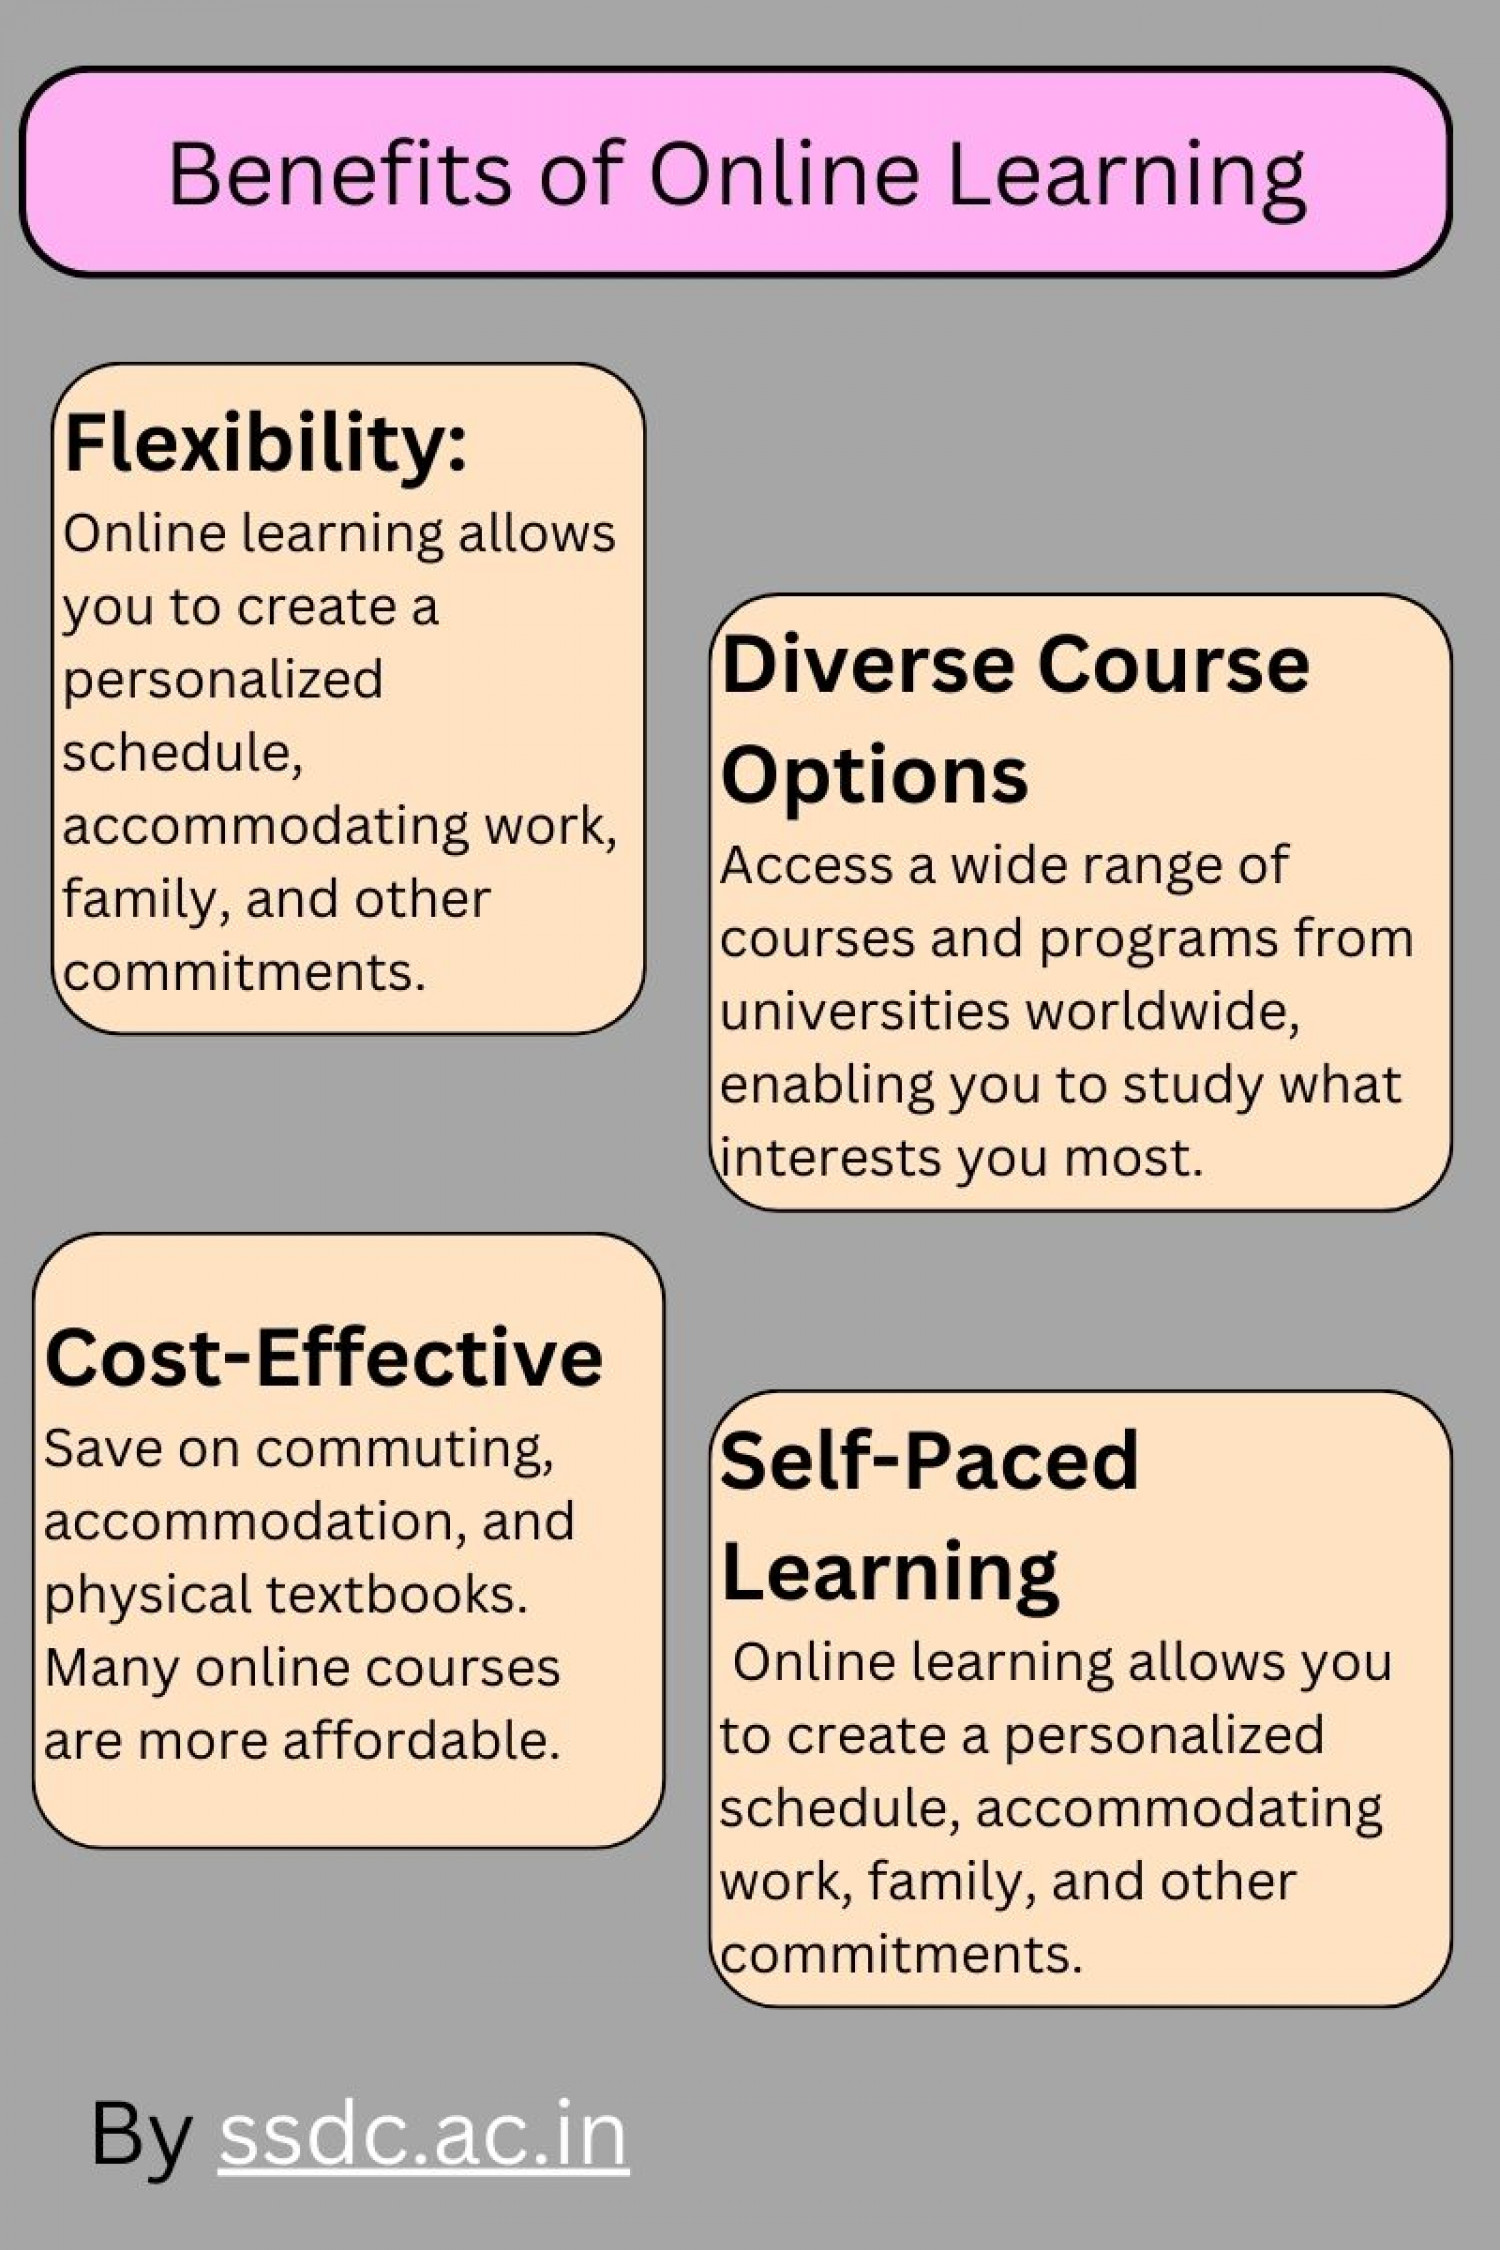 Benefits of Online Learning Infographic